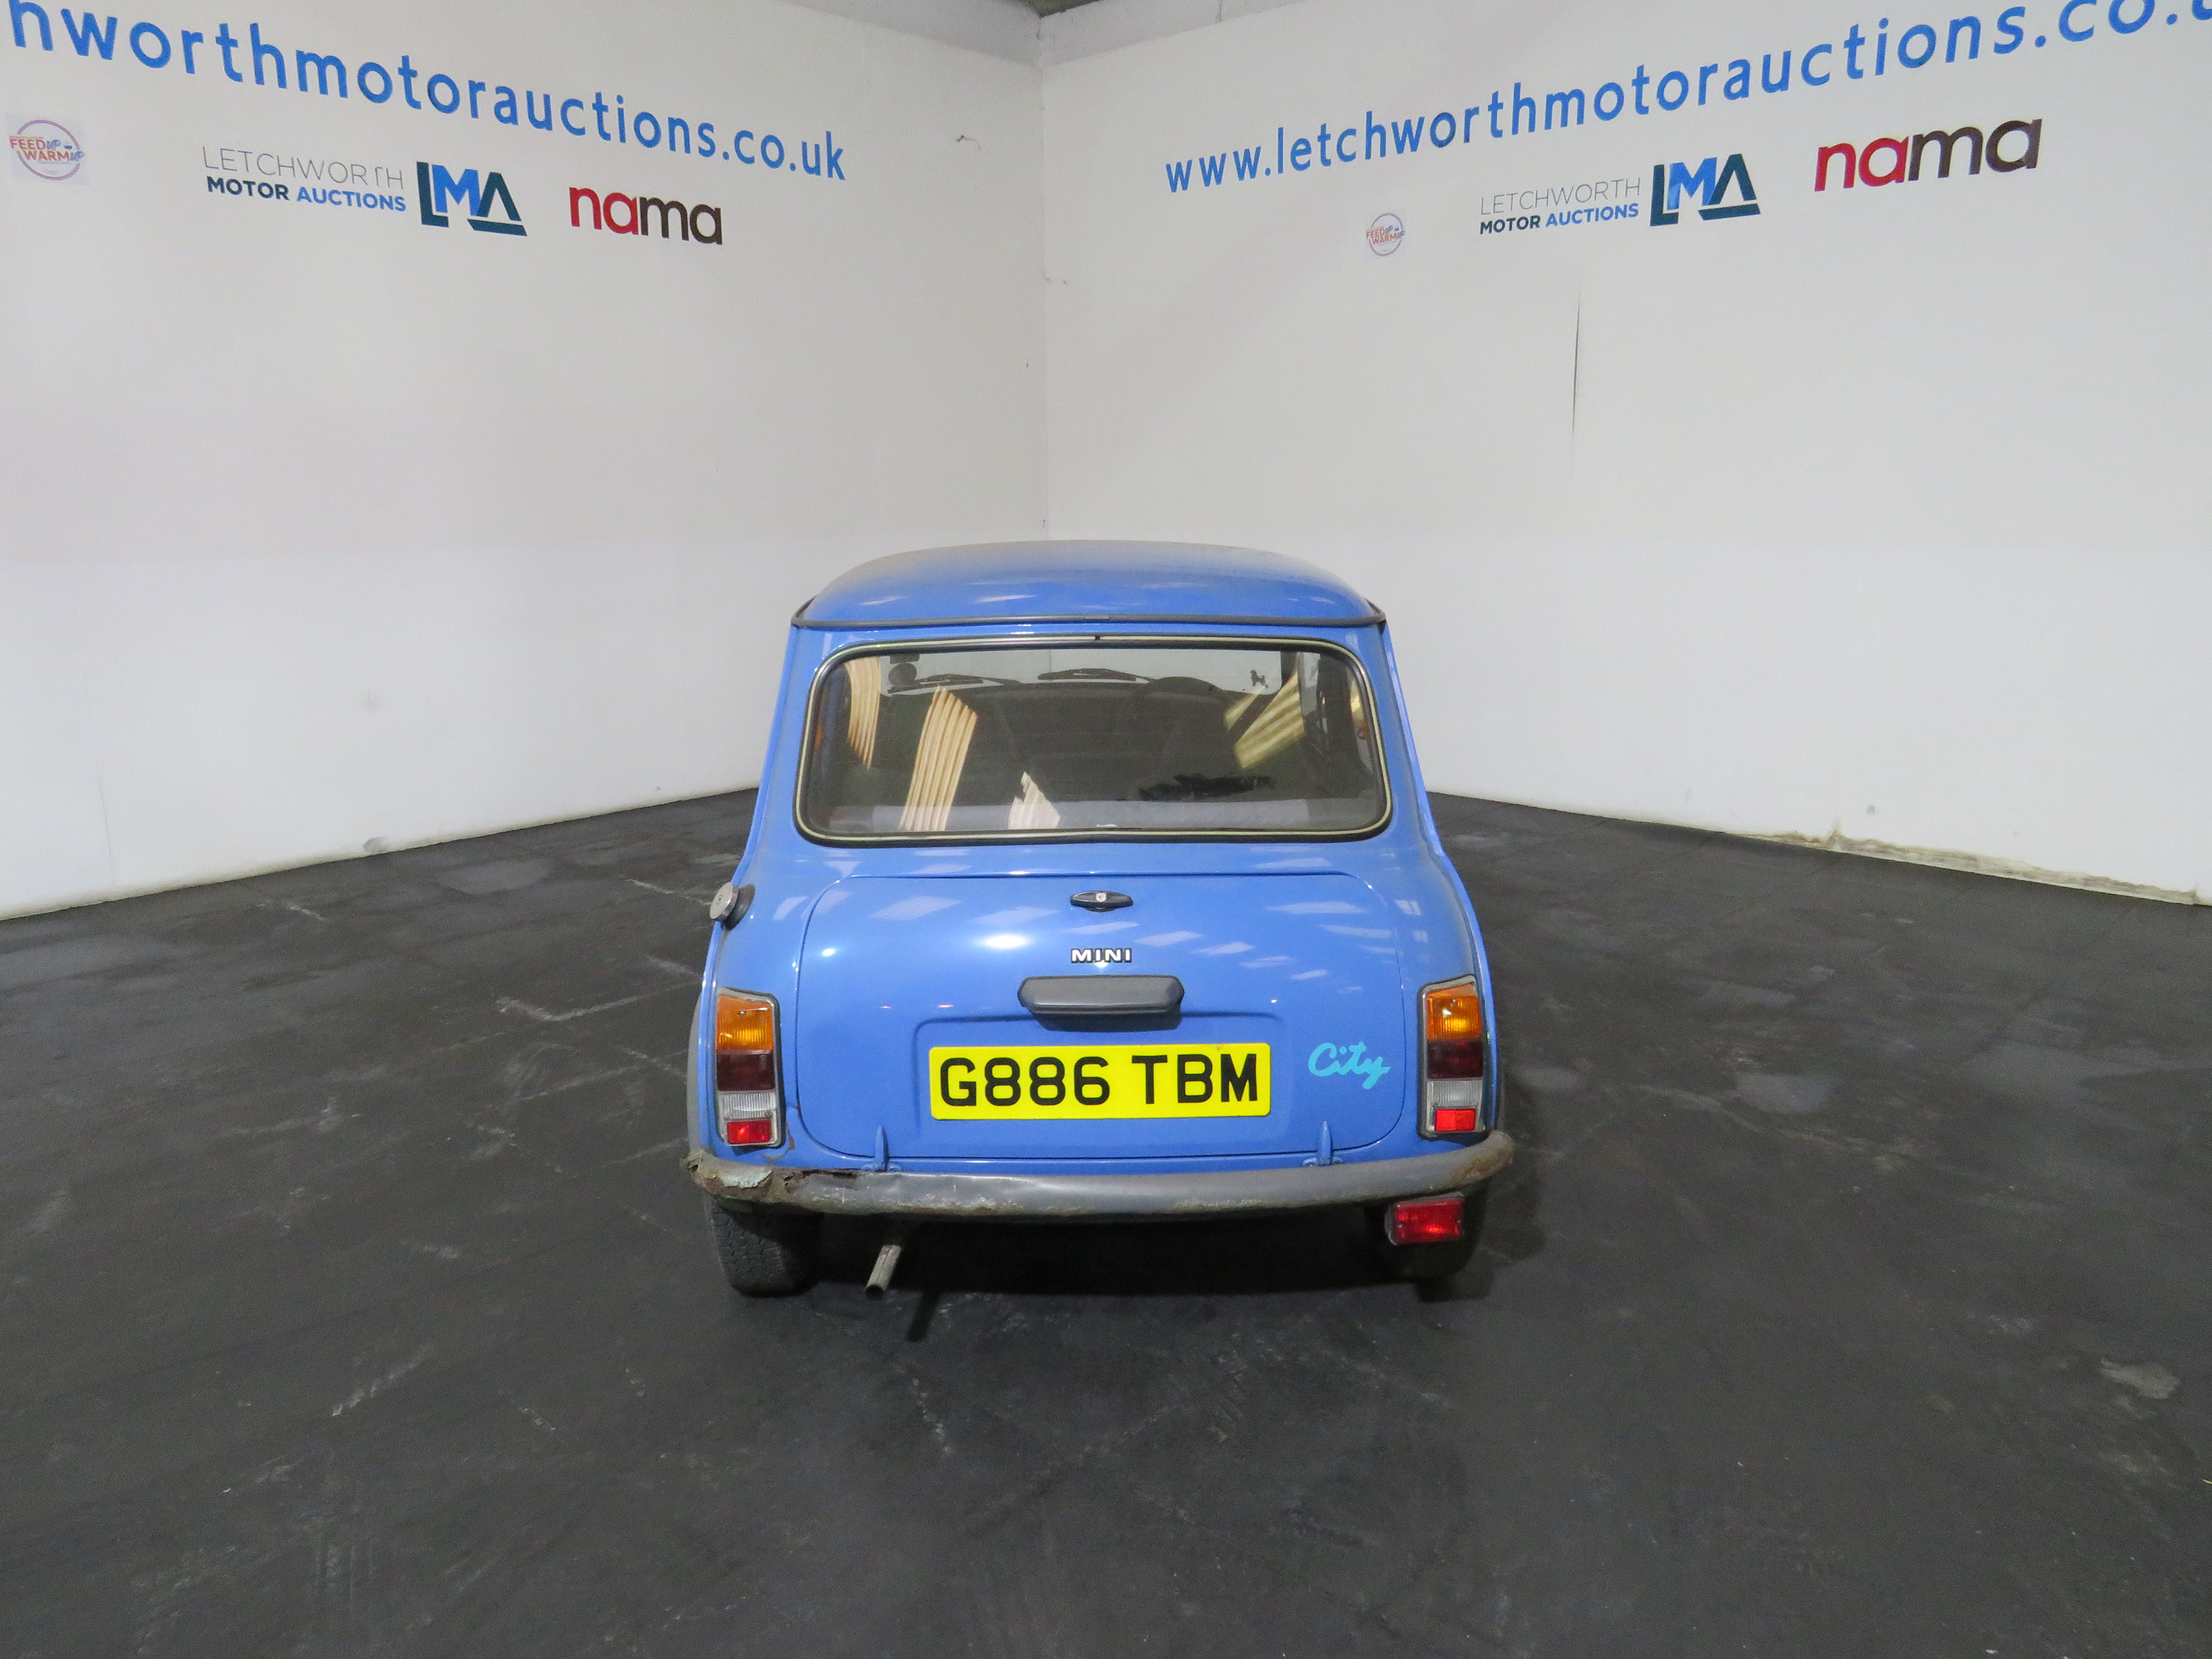 1989 Austin Mini 1000 City E - 998cc - ONE OWNER FROM NEW - Image 5 of 17